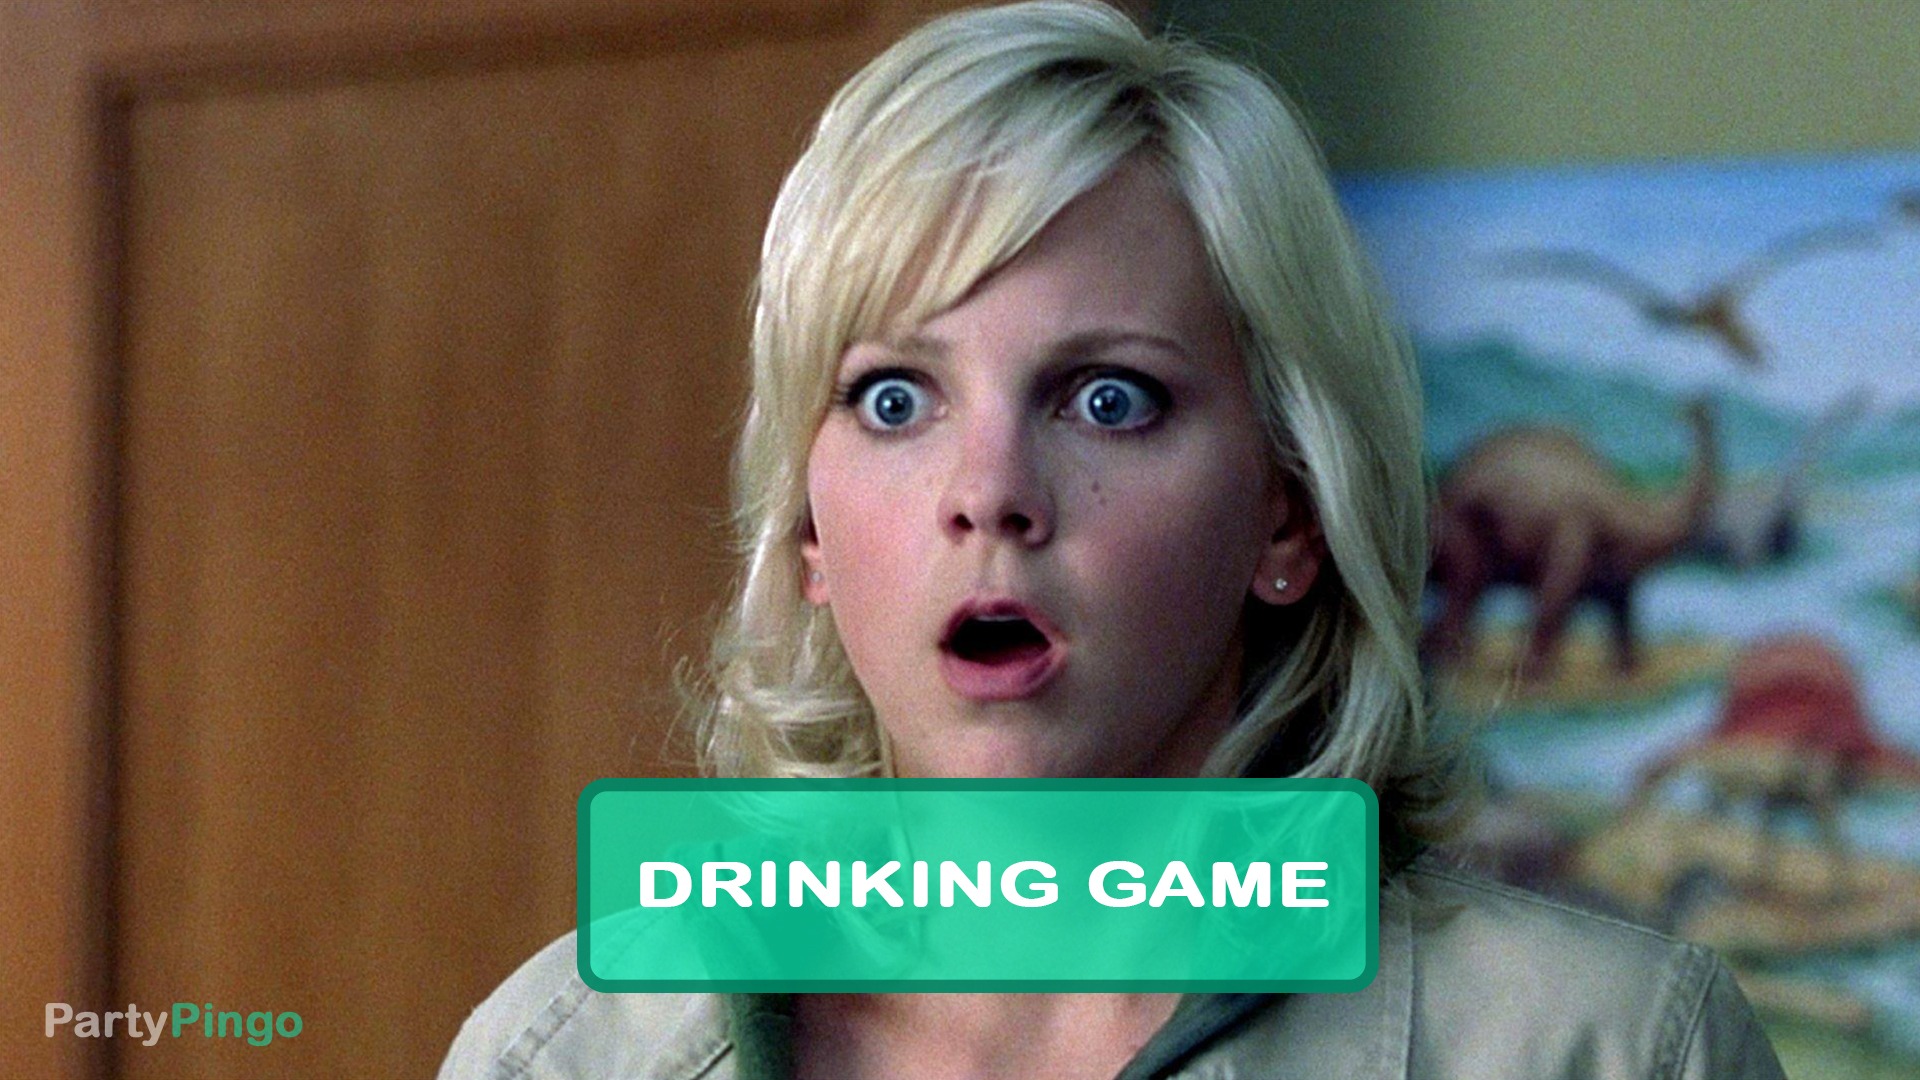 Drinking scary game 2 movie 30 Horror